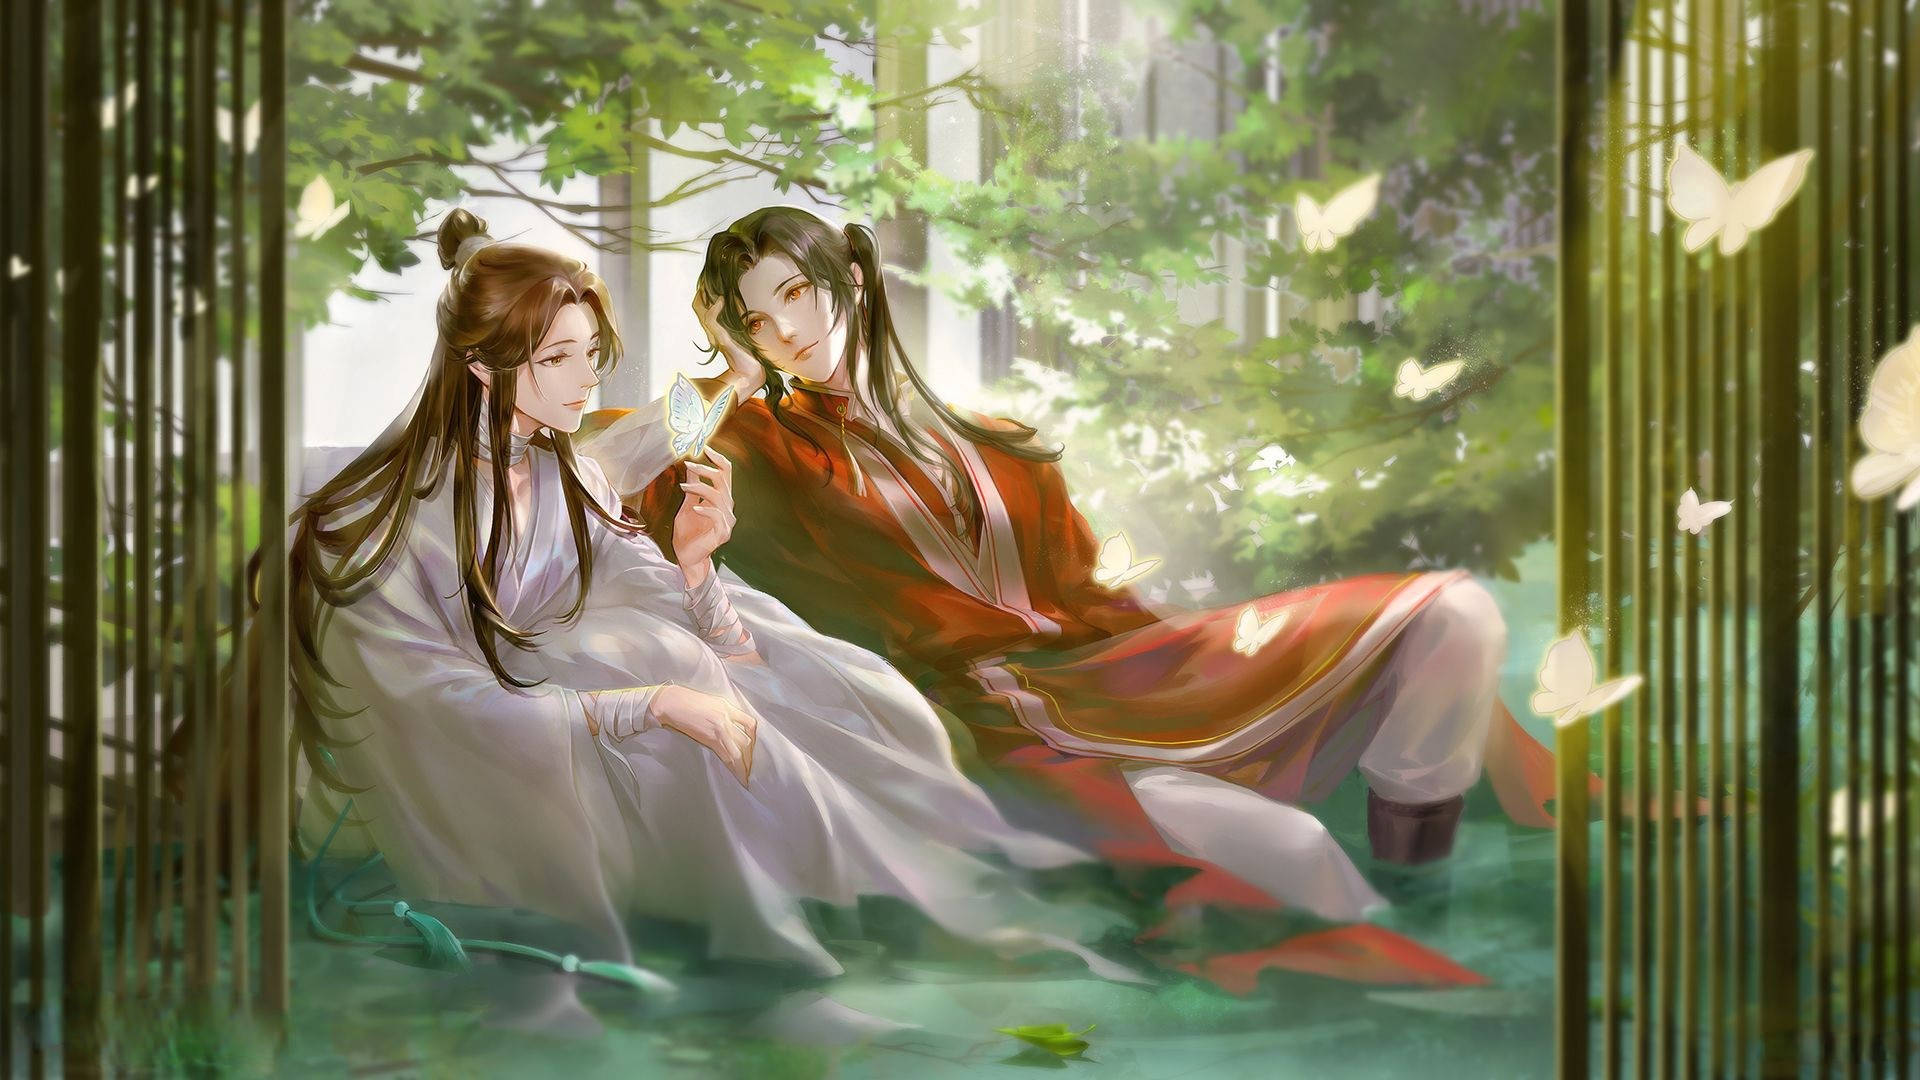 Hu Cheng And Xie In Pond Wallpaper